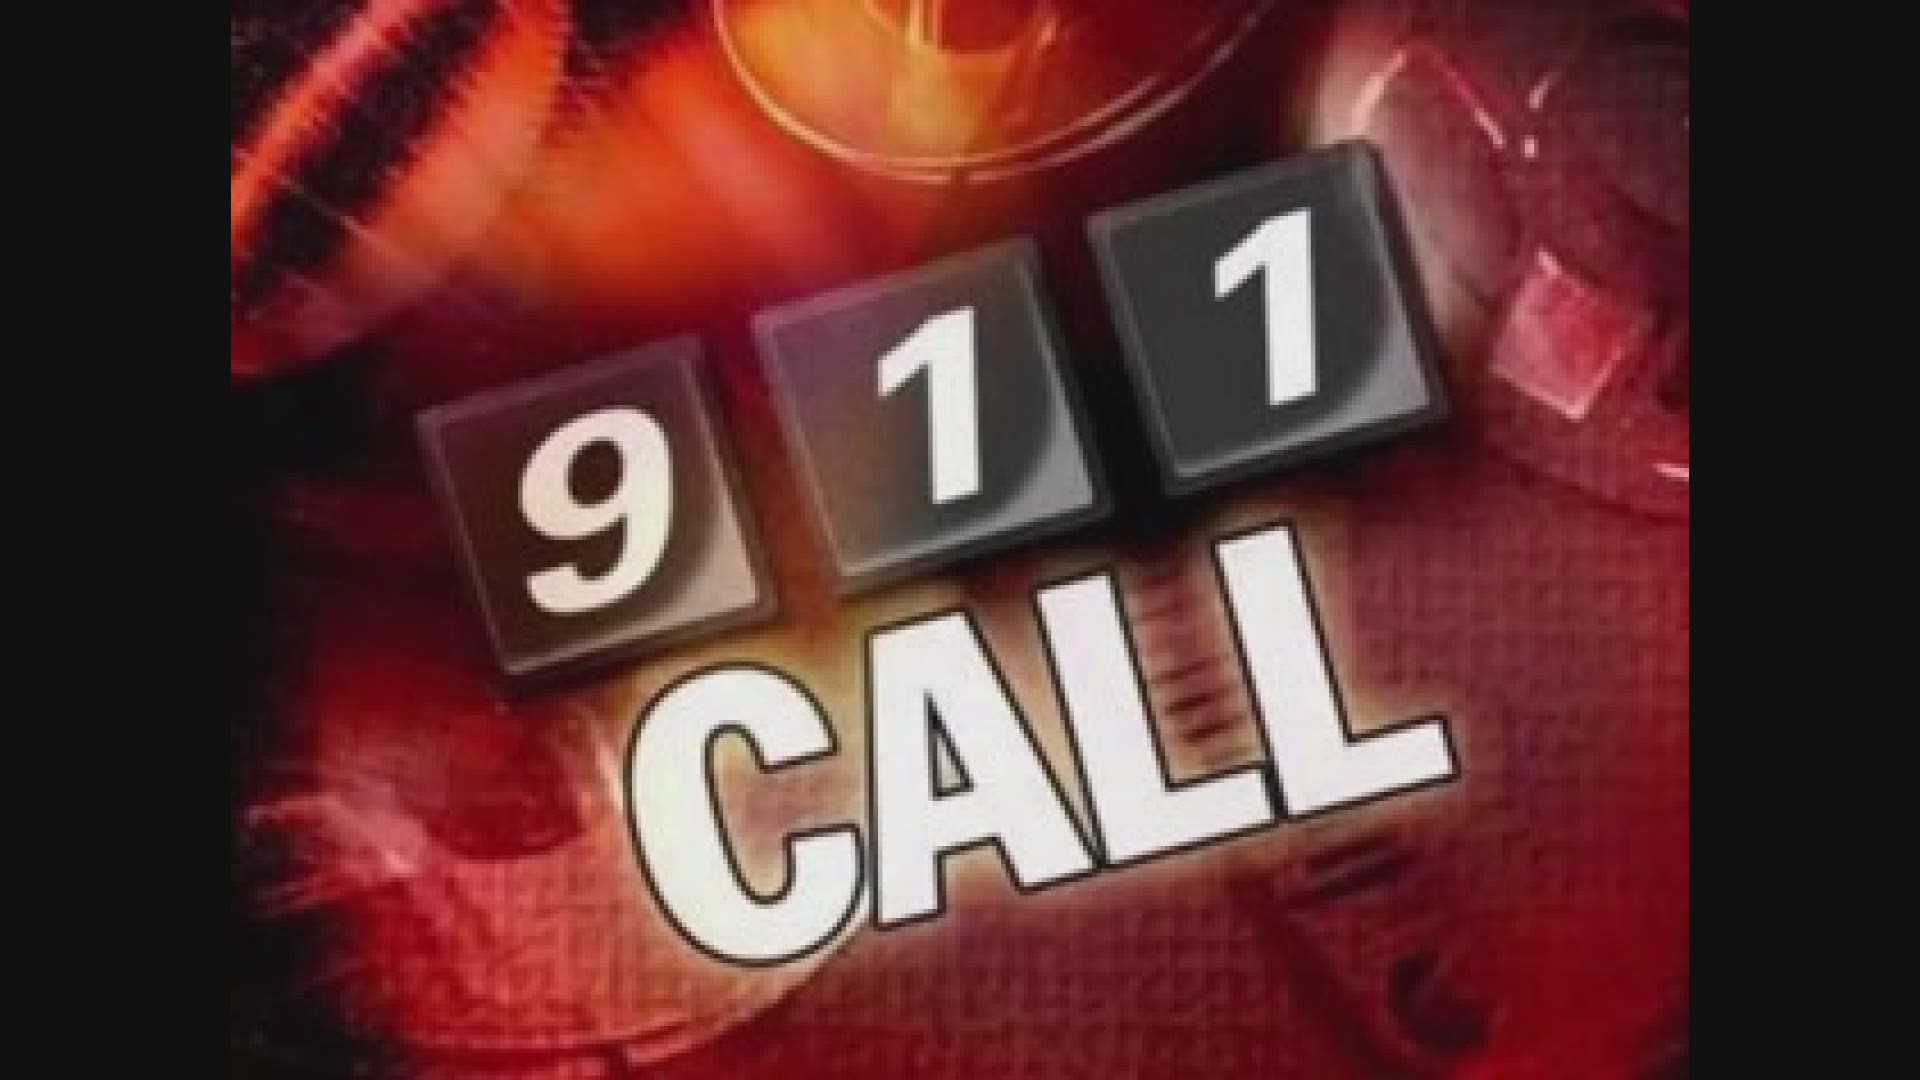 911 call of Larchmere Deli robbery in Shaker Heights